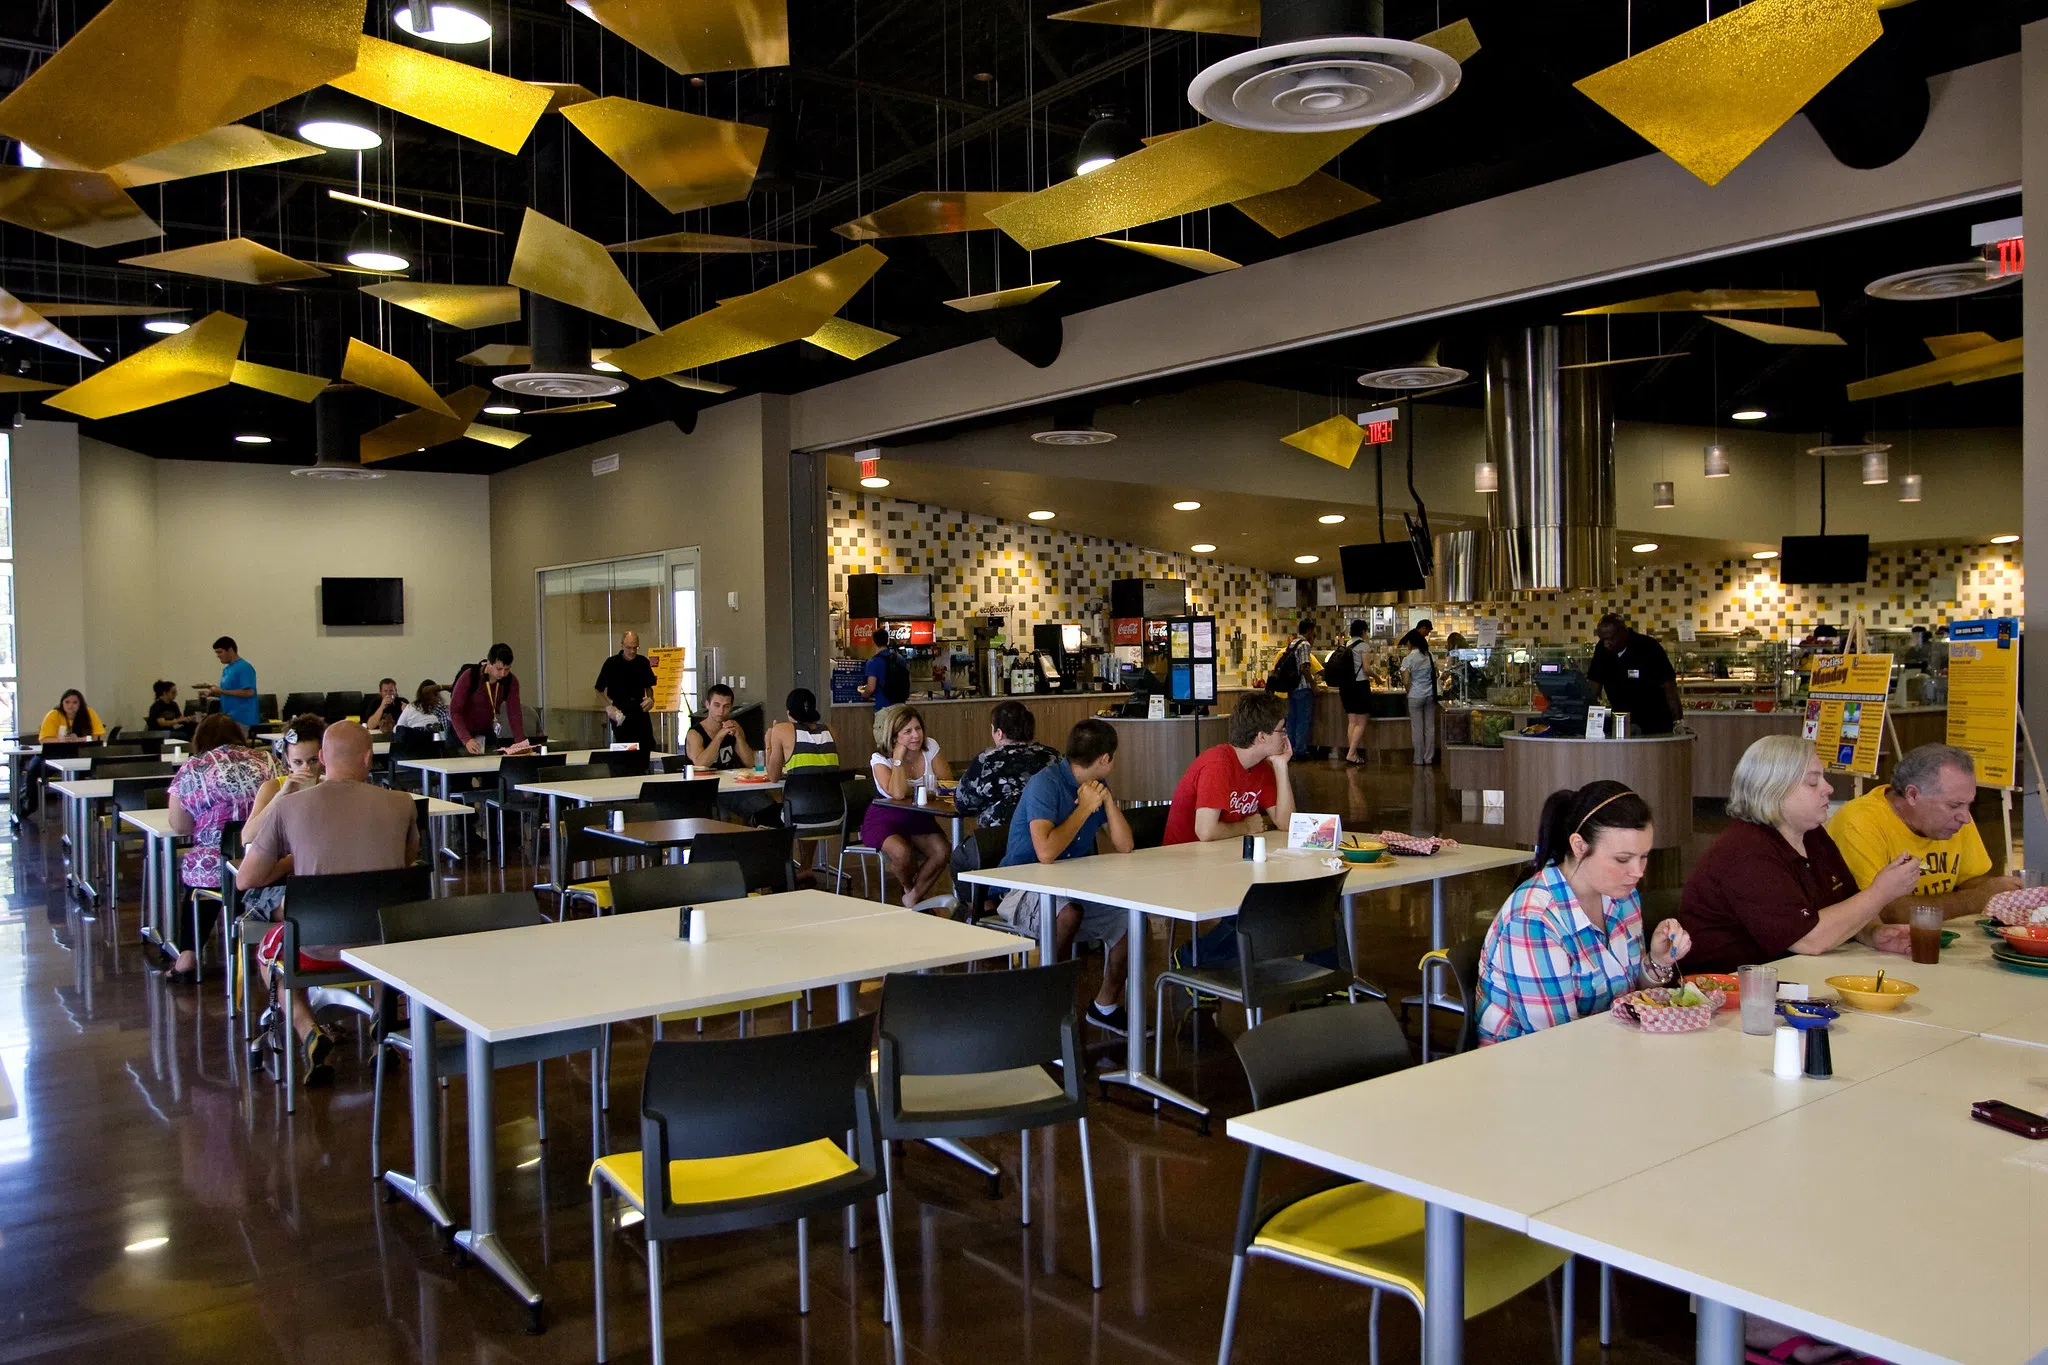 Students eating at tables inside Citrus Dining Pavilion.